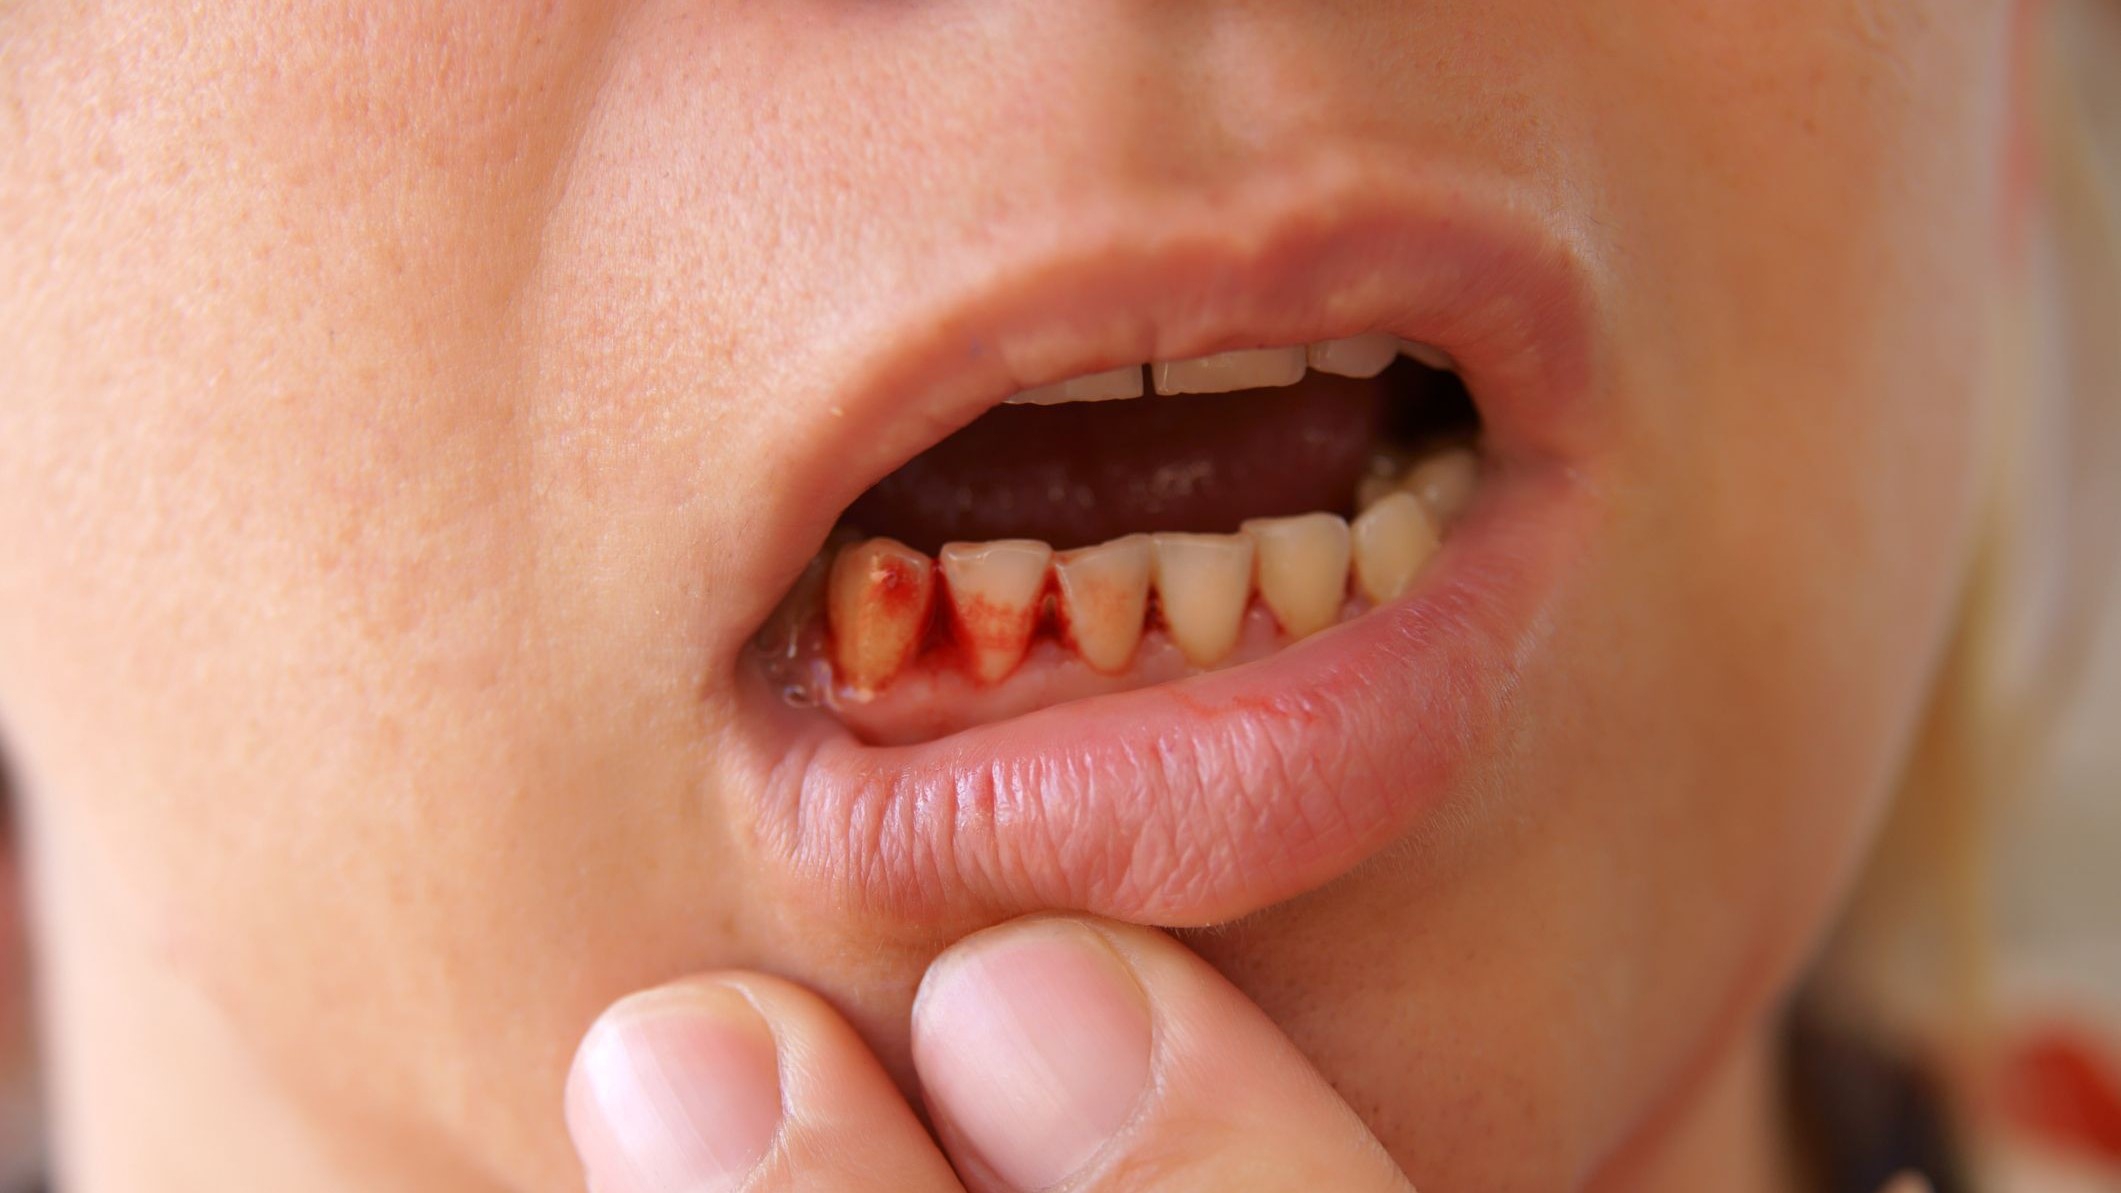 What are the main causes of uncontrollable bleeding in tooth sockets?